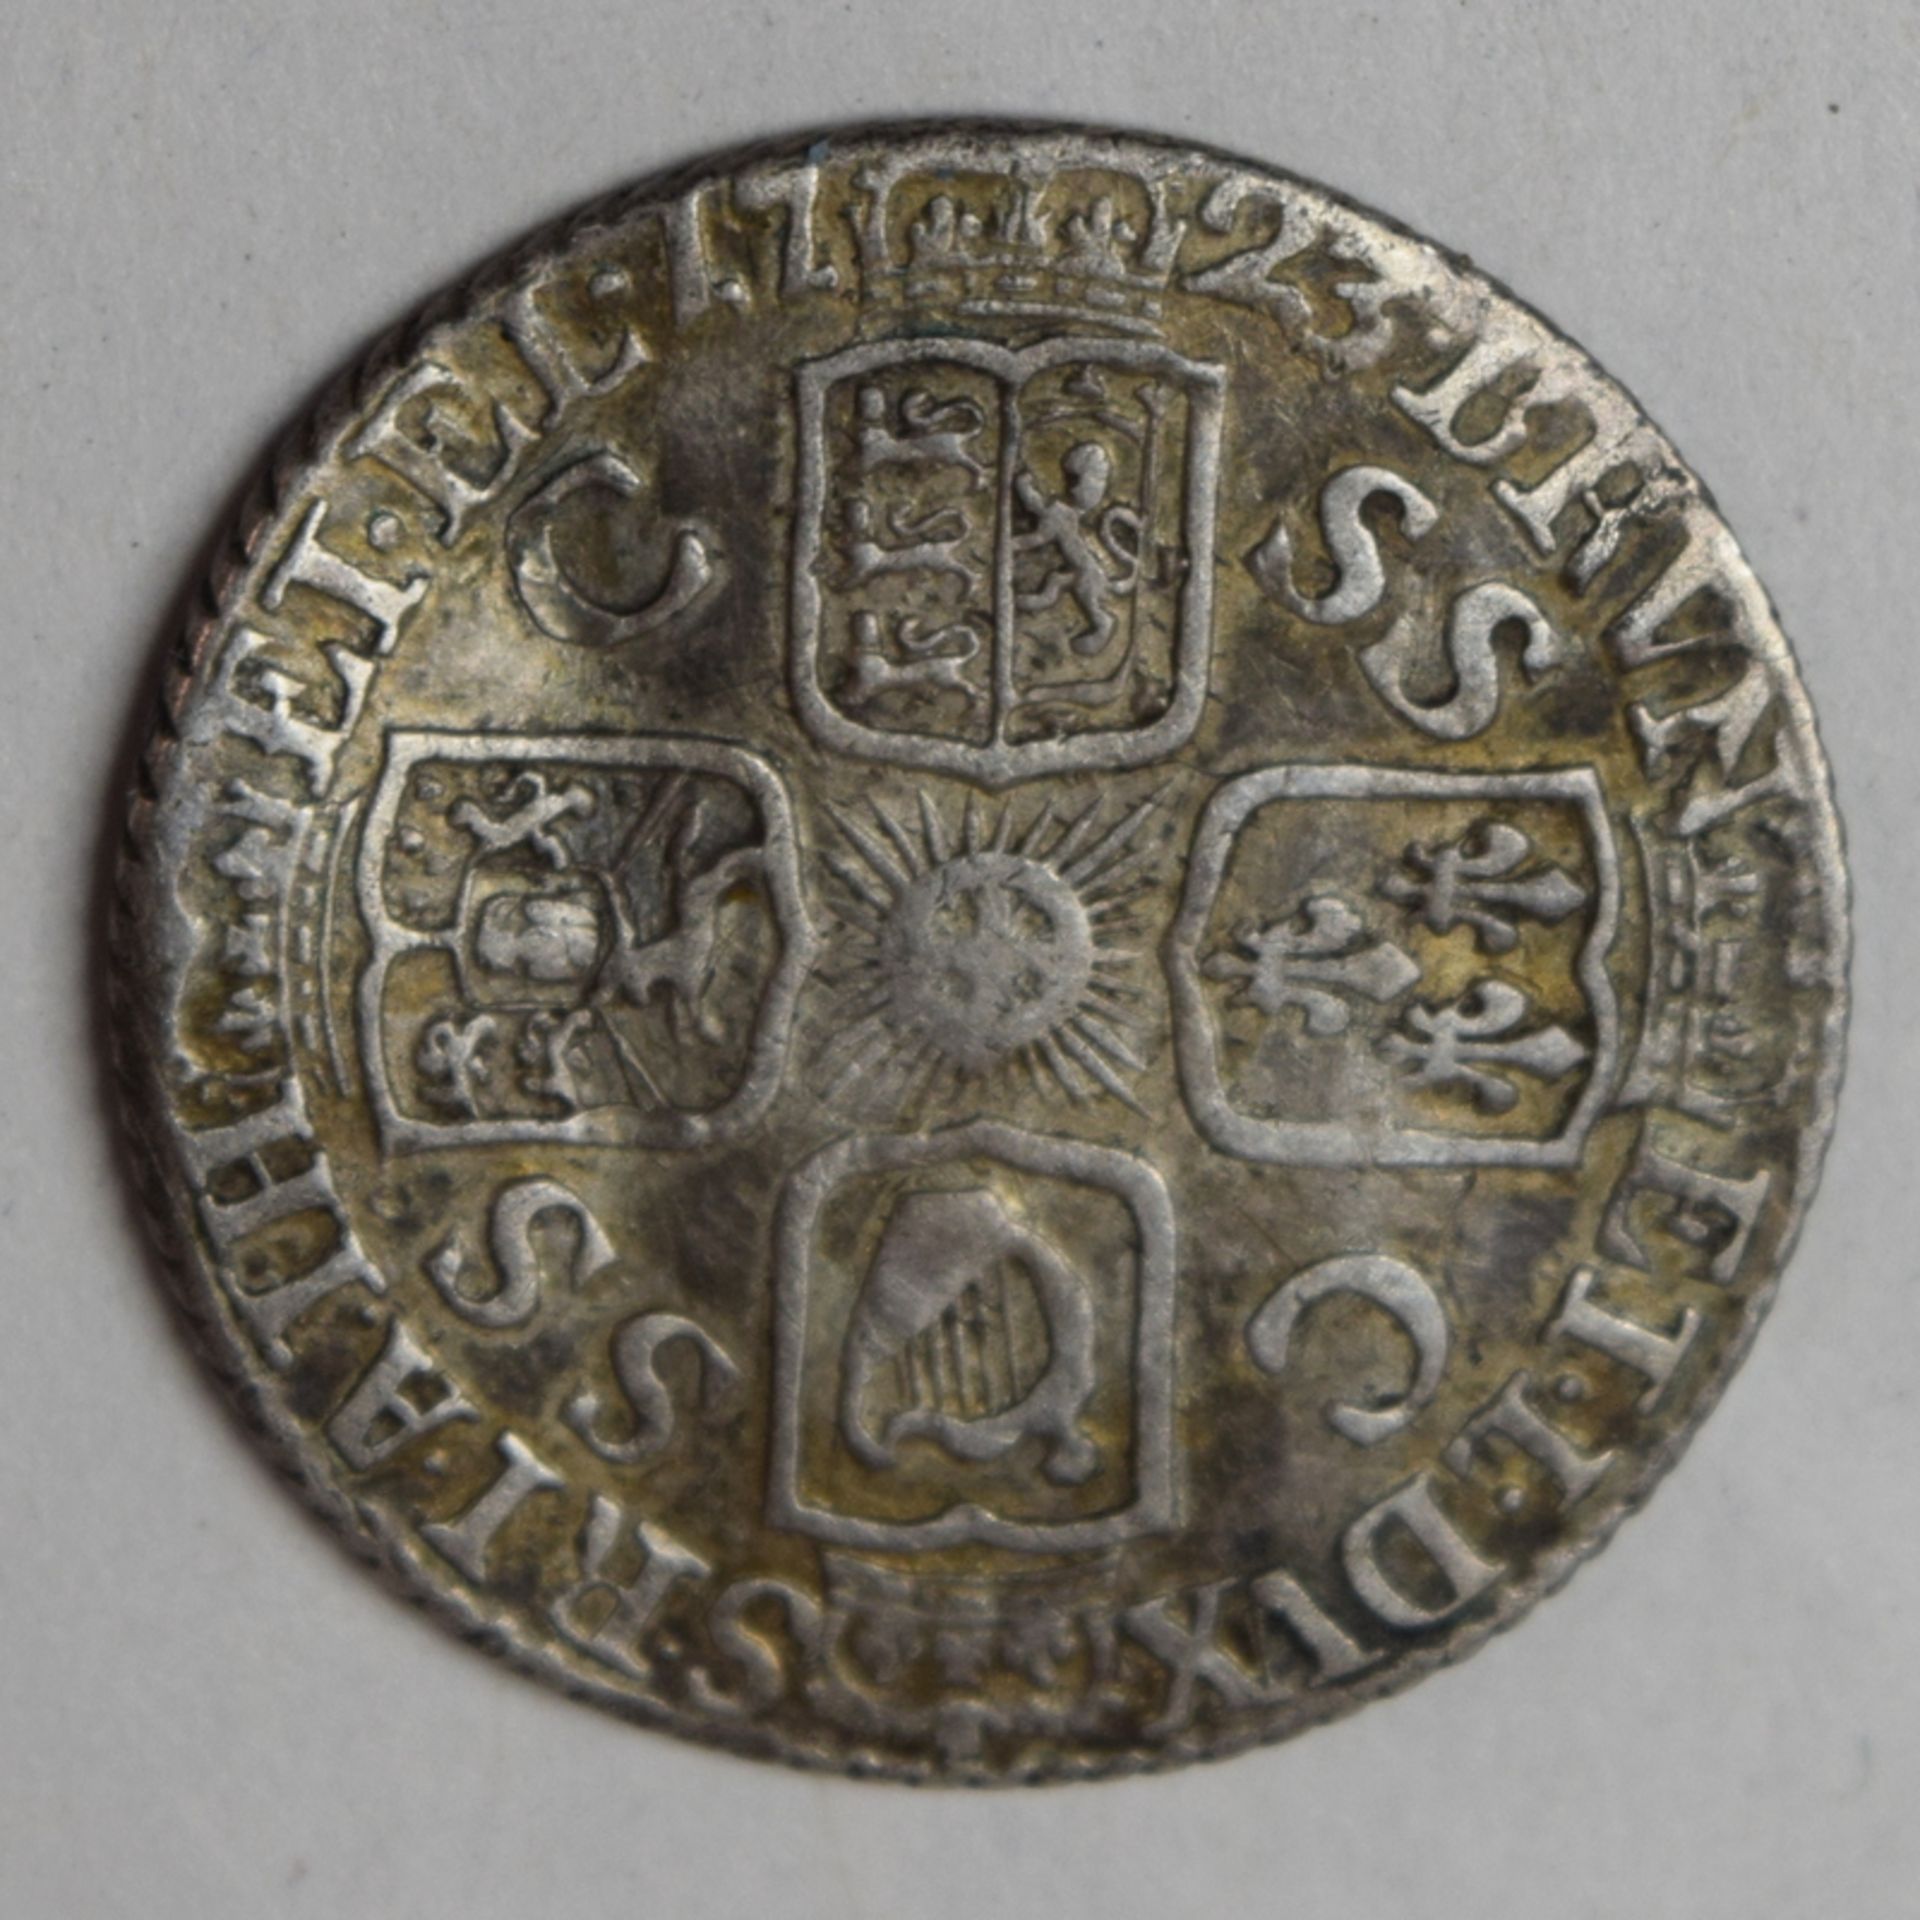 1723 King George 1st Silver Shilling - Image 2 of 3